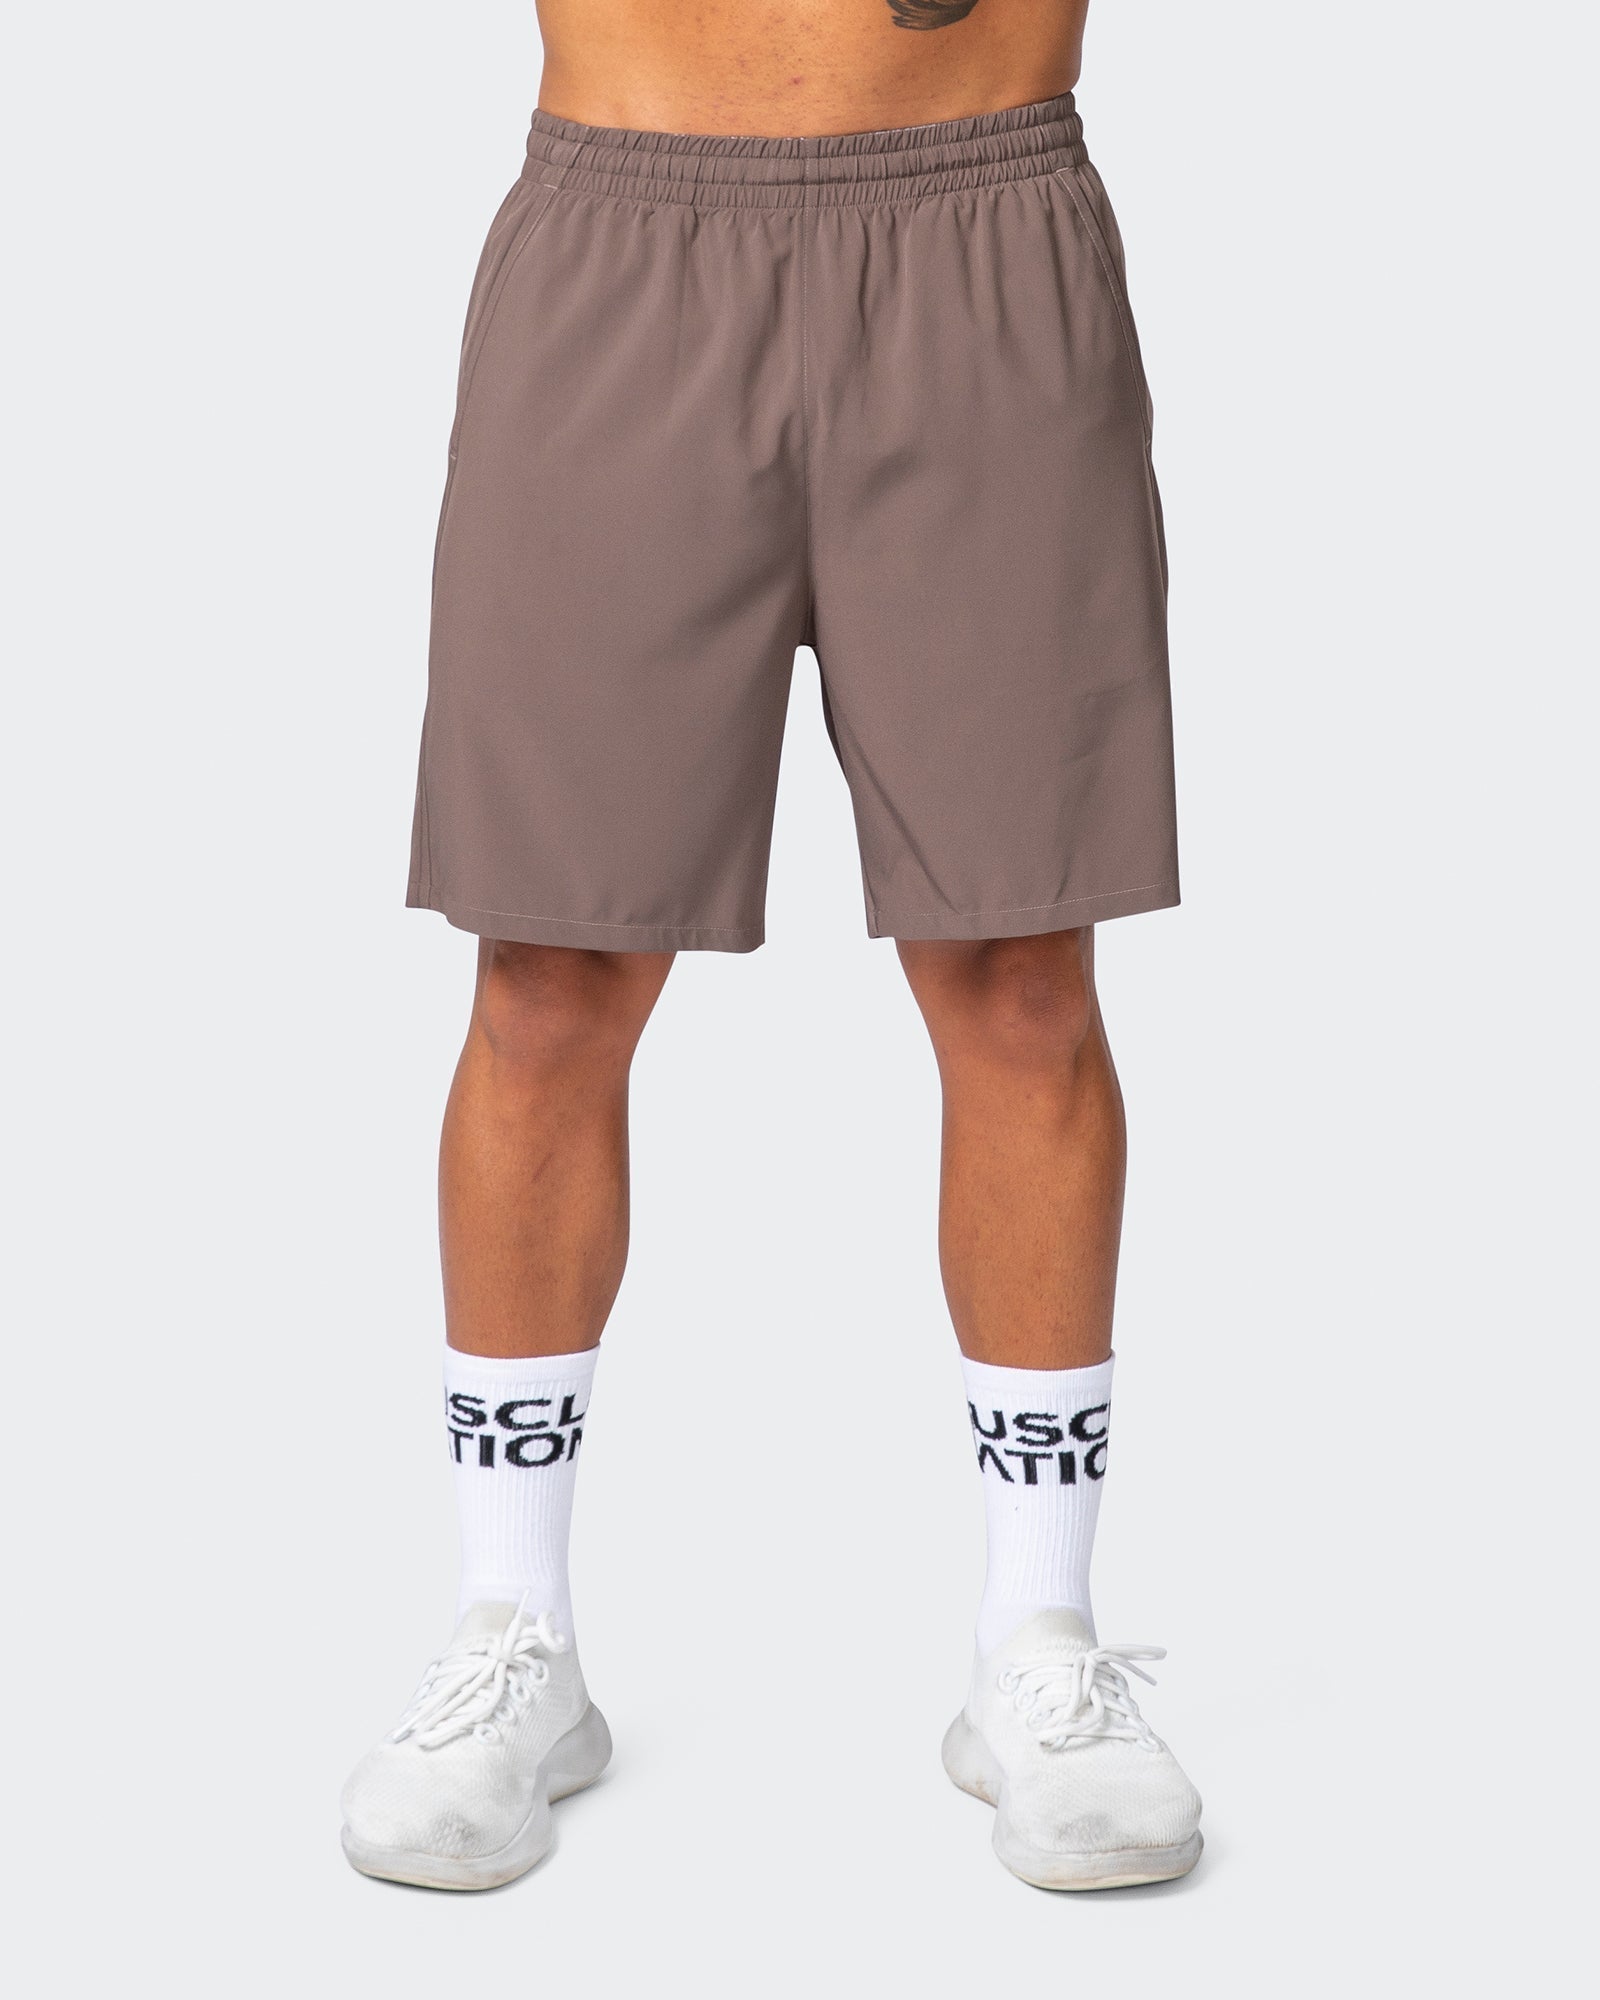 musclenation NEW HEIGHTS 7" SHORTS Dark Taupe